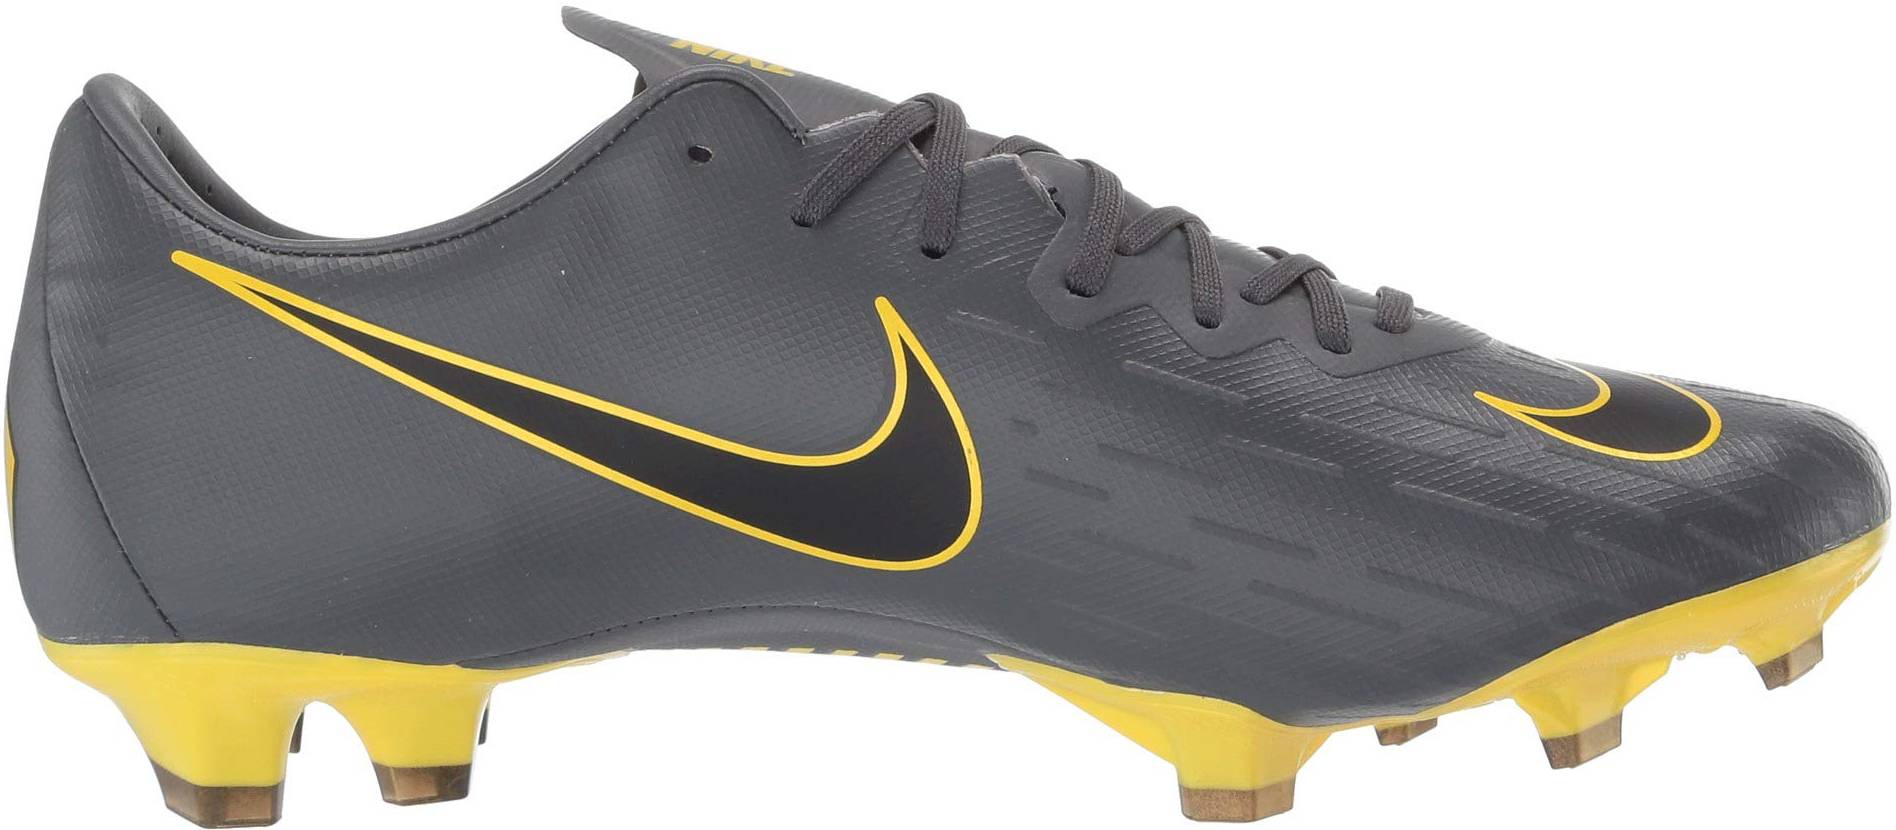 best soccer cleats 215